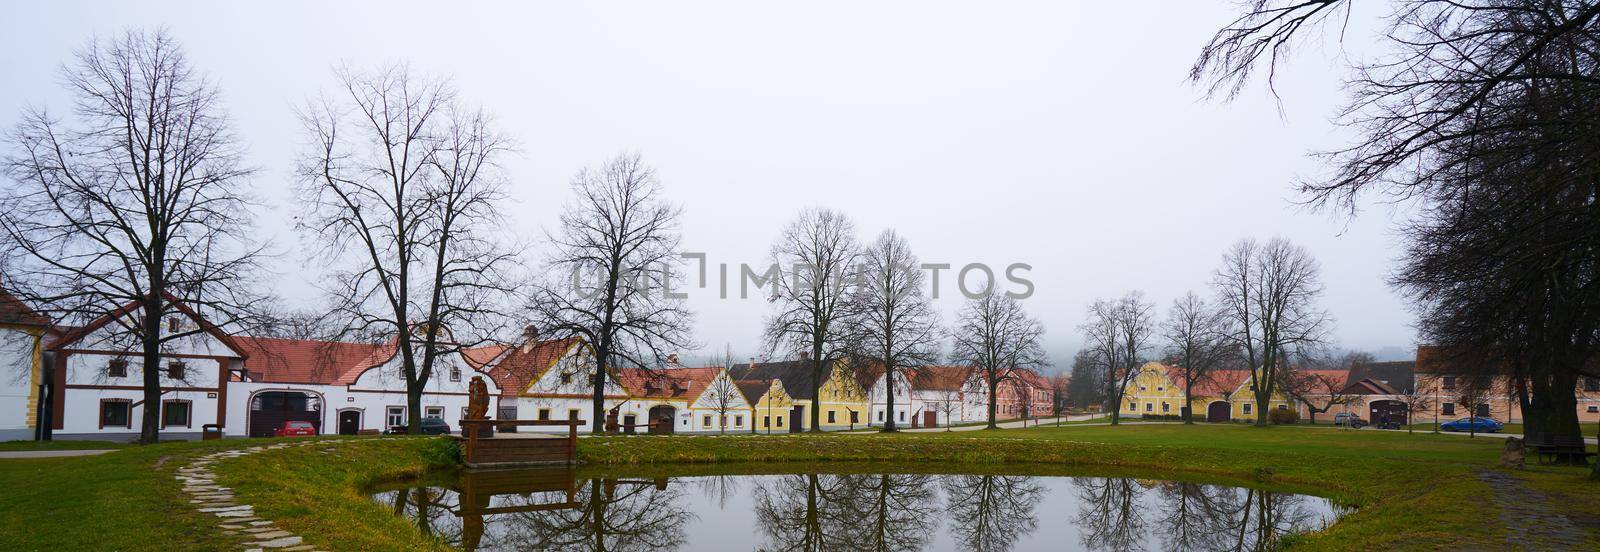 HOLASOVICE,CZECH REPUBLIC - November 24,2019 - View at the Houses in Holasovice. Holasovice is a small historic village located in the south of the Czech Republic by Jindrich_Blecha